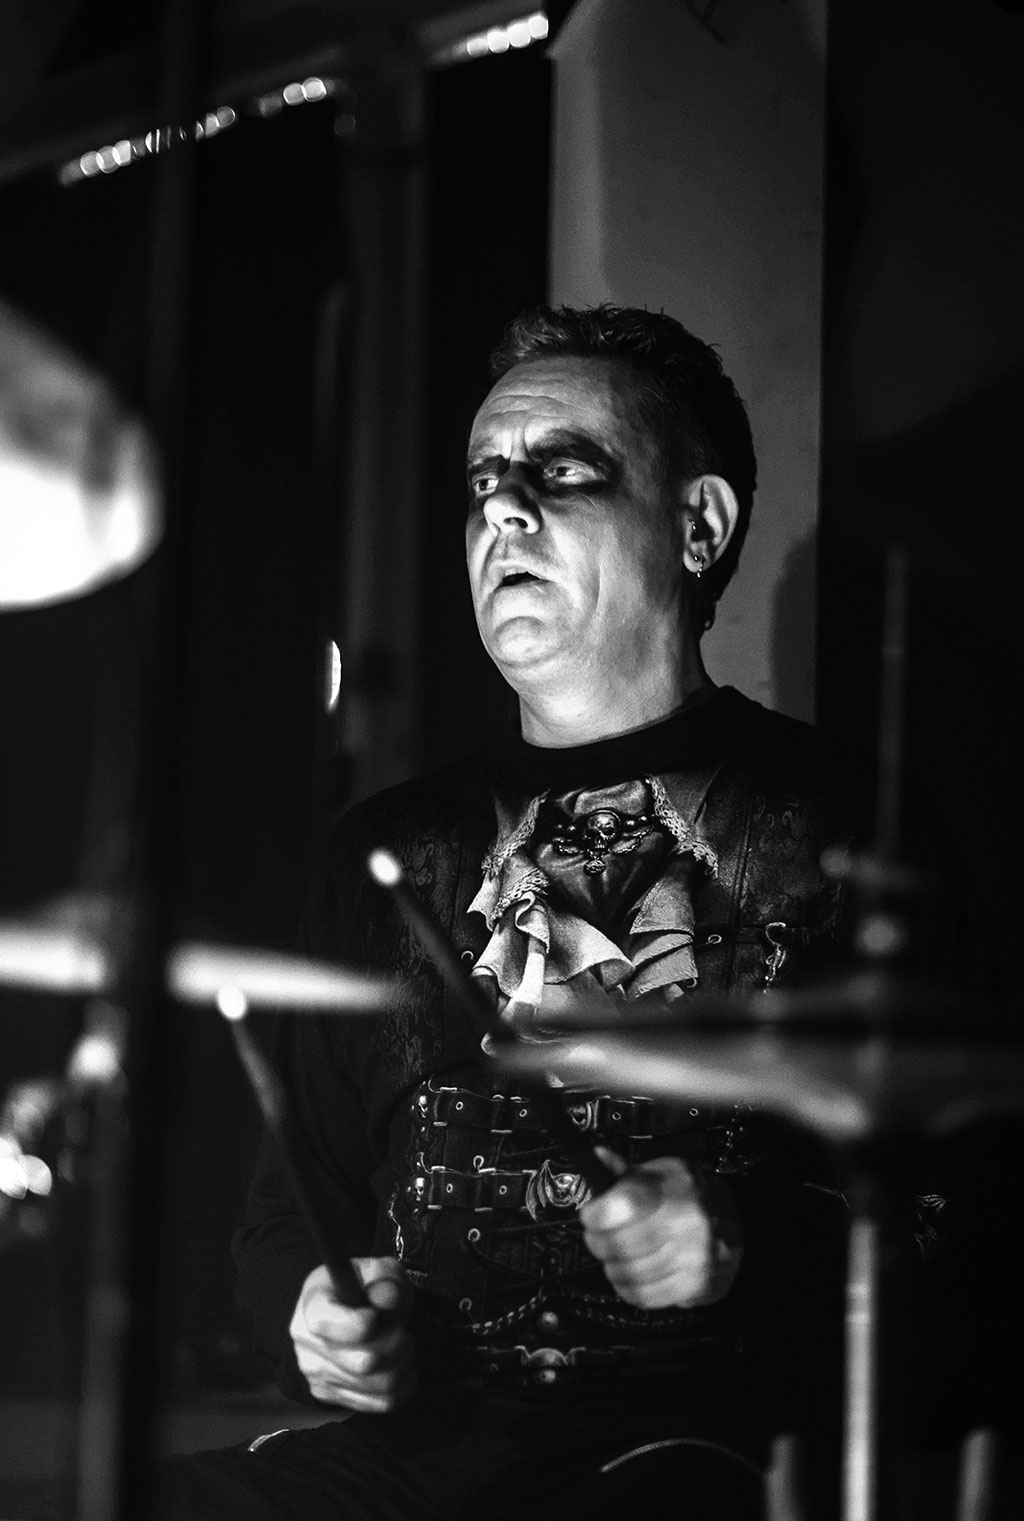  UK Music Photographers Image of Live Gig showing Goth Drummer at the Voodoo Lounge Plymouth 